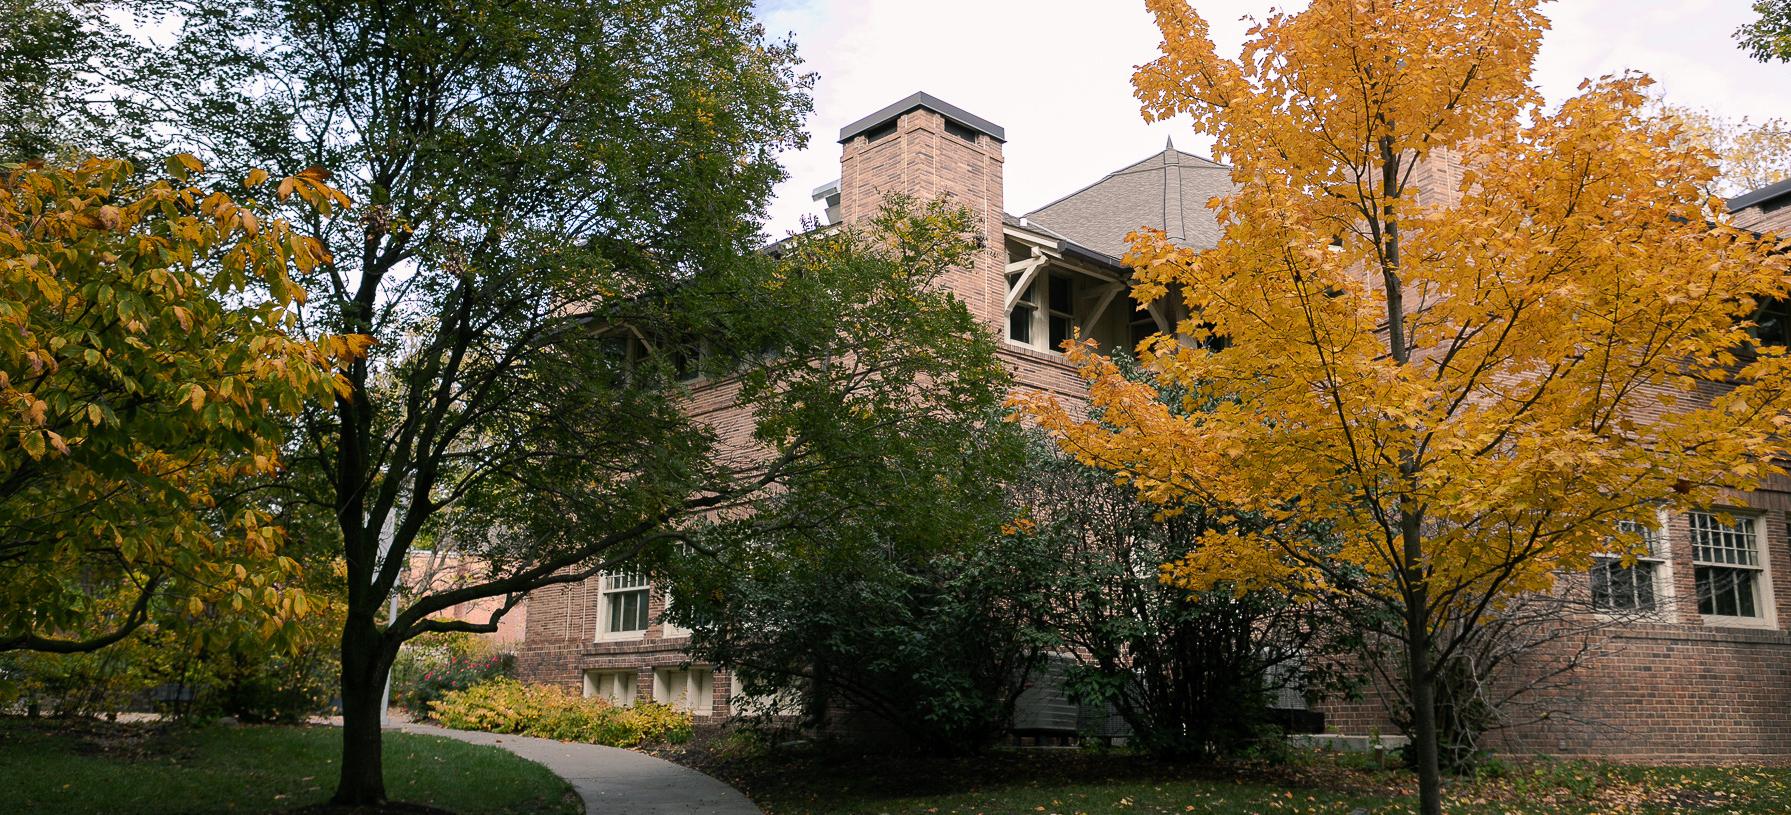 Building on Crete Campus in the Fall